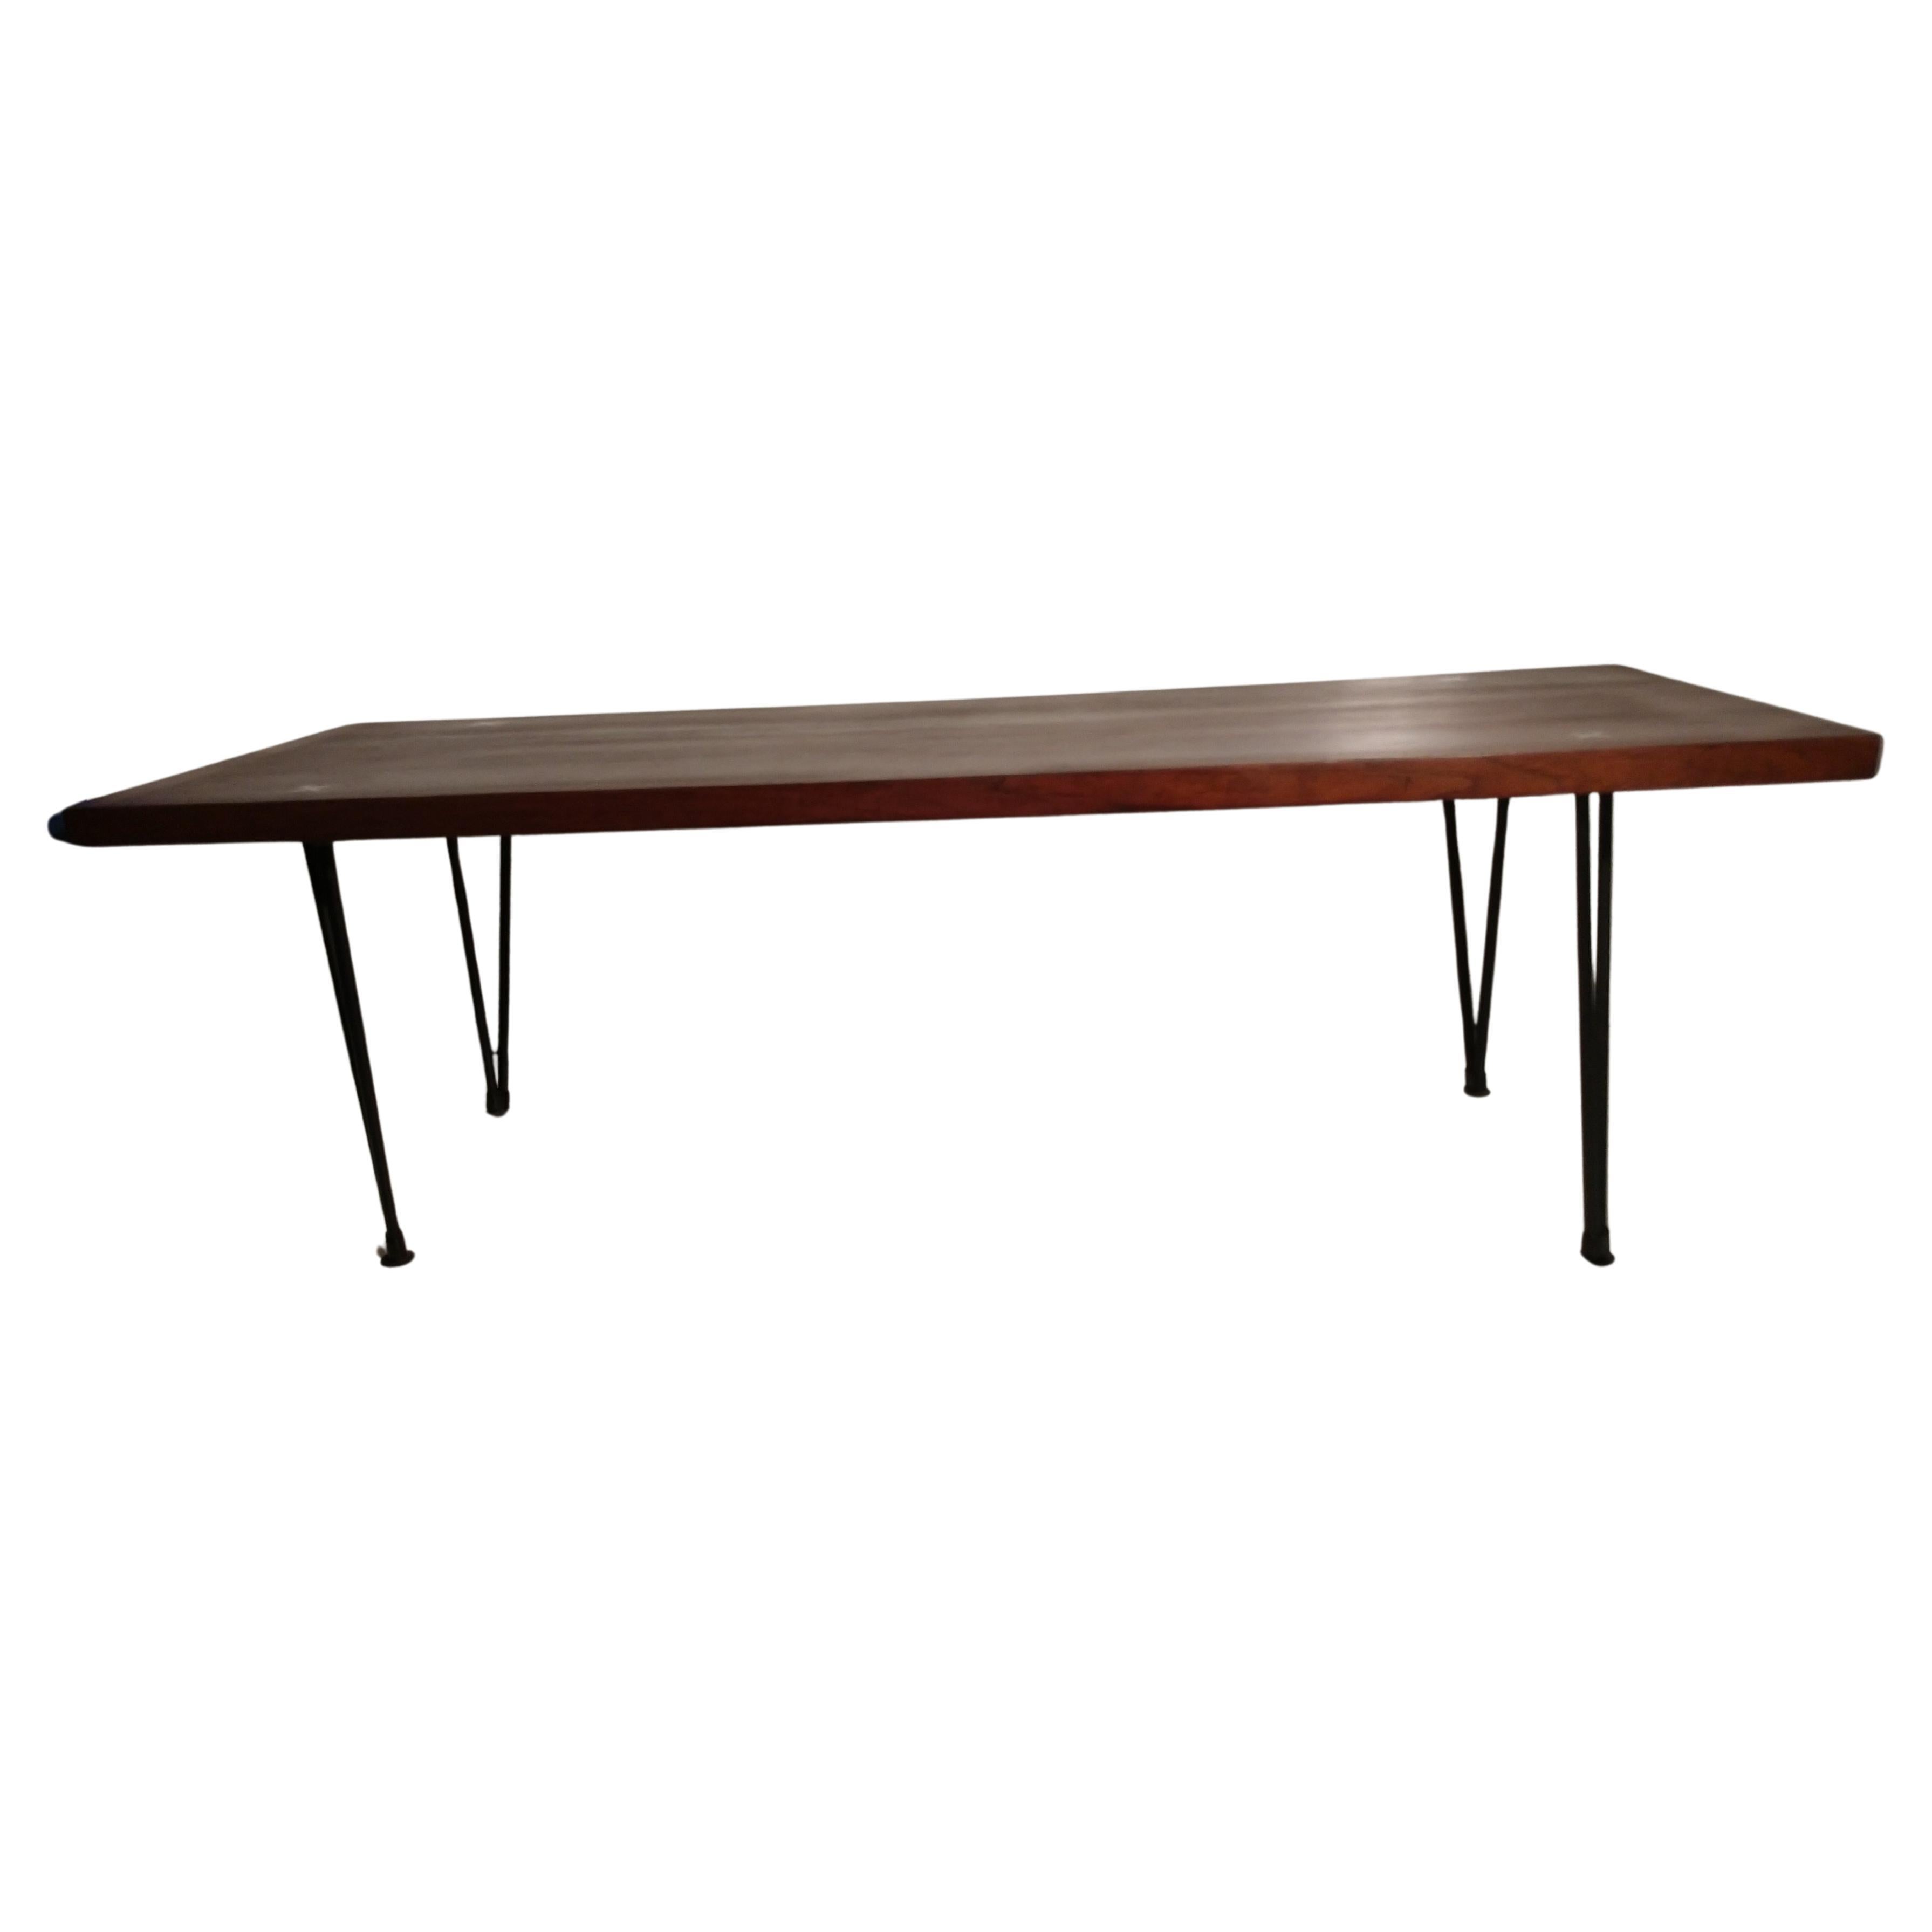 American Mid-Century Modern Cocktail Table by Merton Gershun For Sale